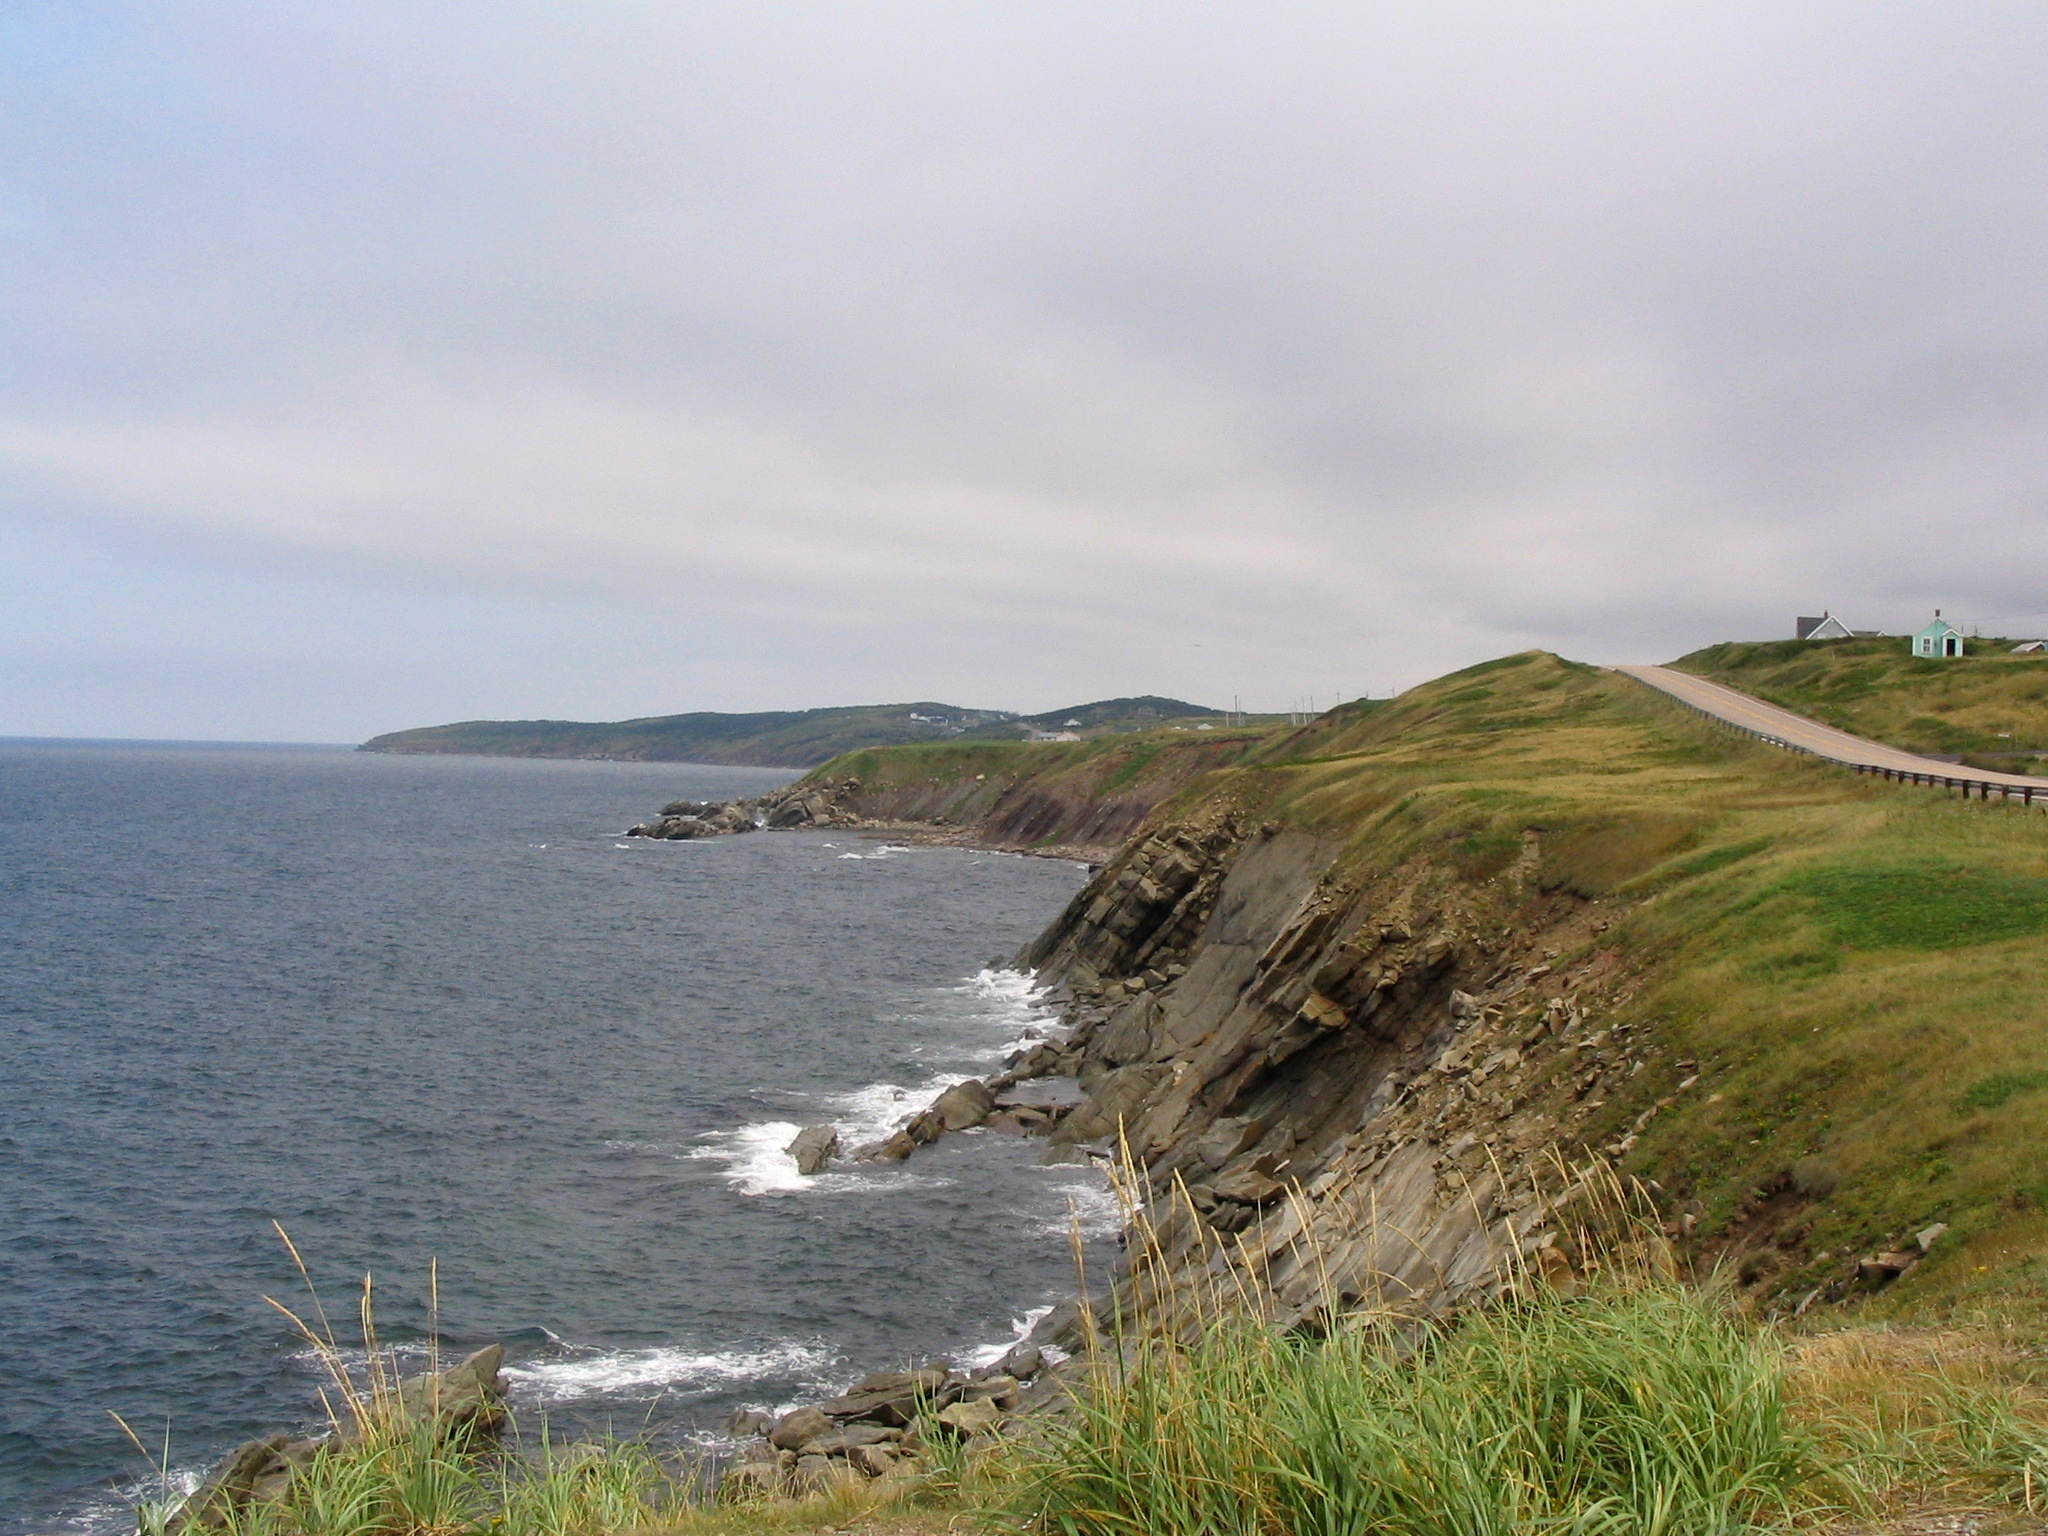 The coastline along the Cheticamp area is gorgeous.  Taking the Cabot Trail heading north toward Cheticamp is a prefect roadtrip.